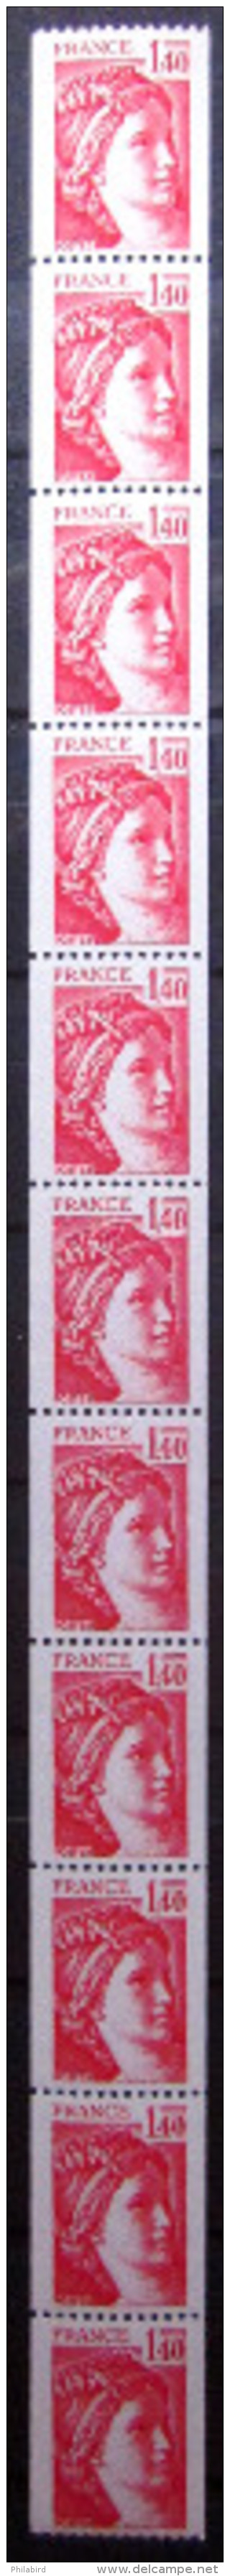 FRANCE            ROULETTE  76  (11 Timbres)            NEUF** - Coil Stamps